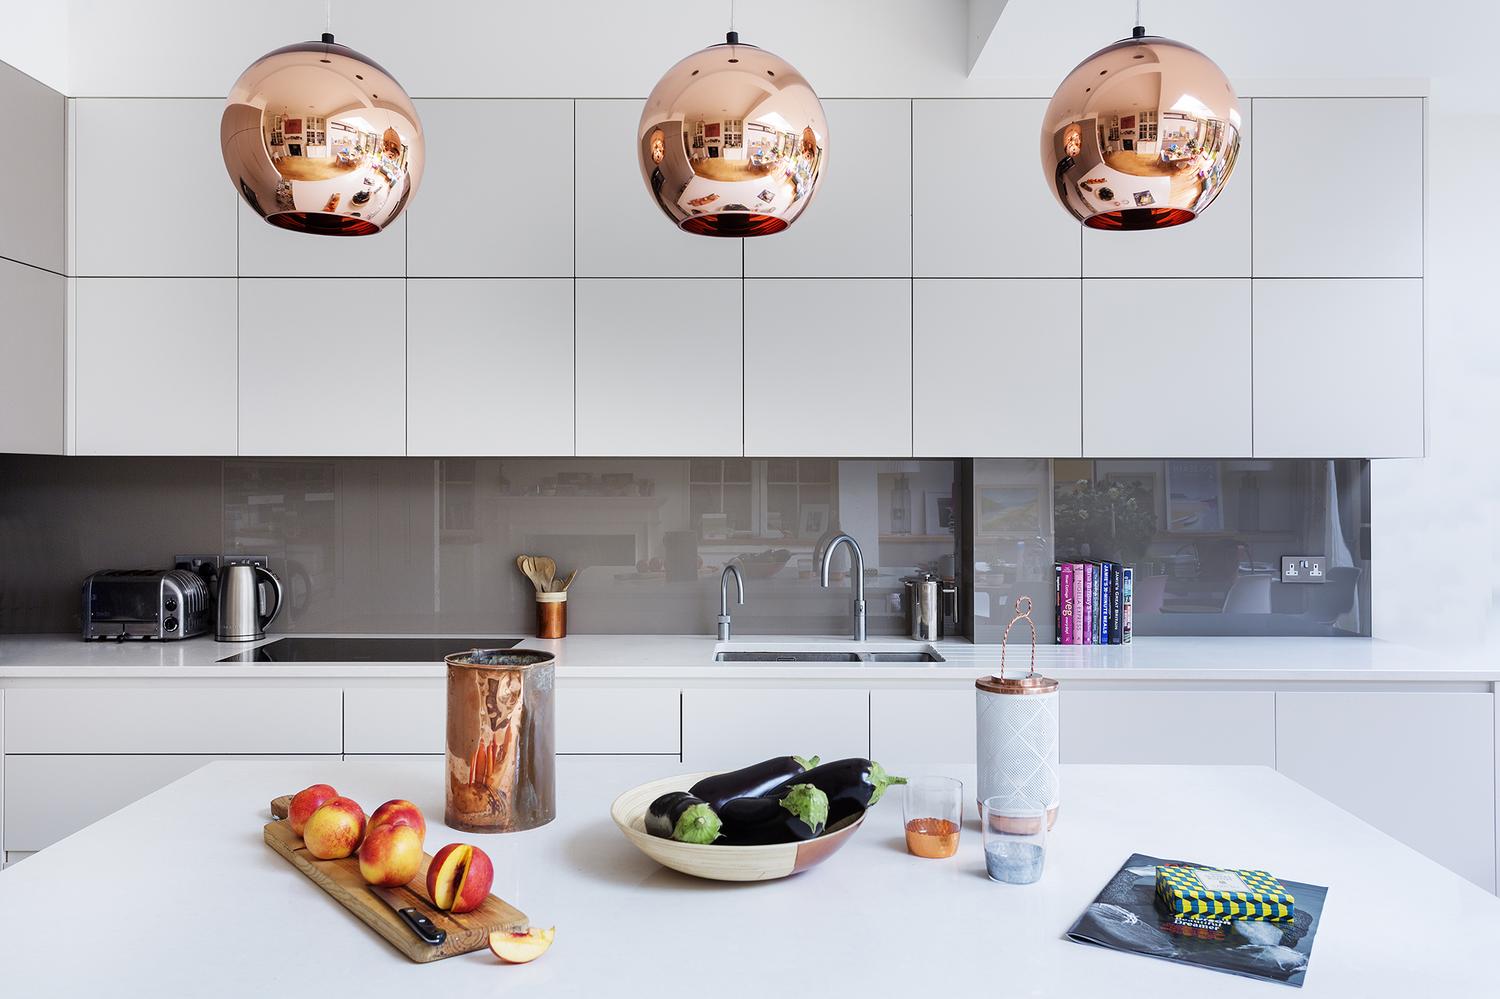 A Modern Kitchen Decor with Copper Lamps and Vintage Details